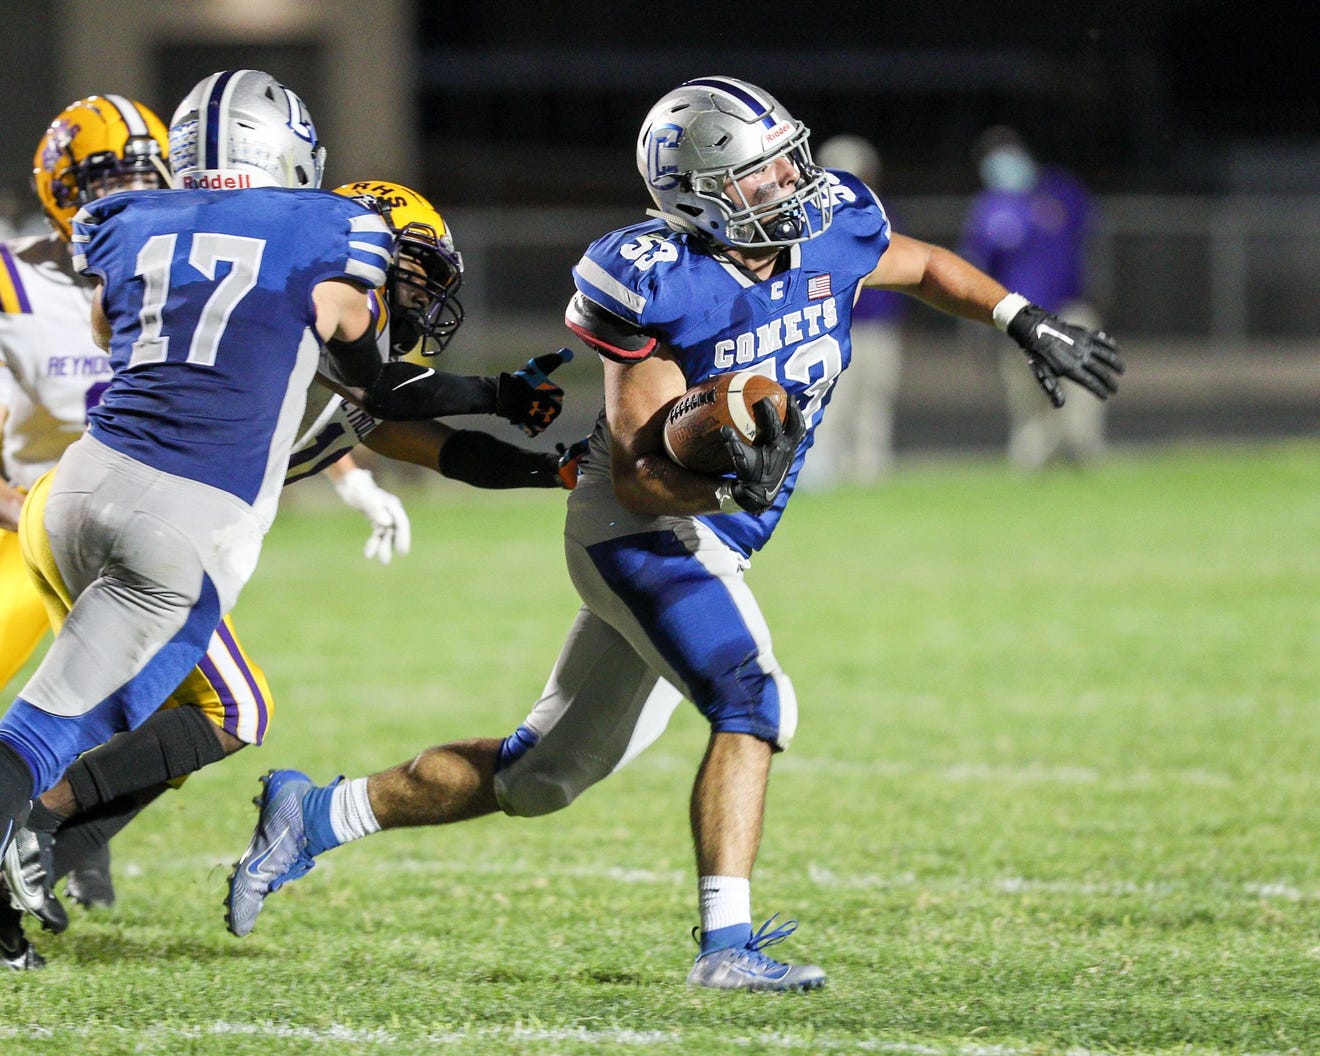 Central Crossing: Comets never quit responding to challenges